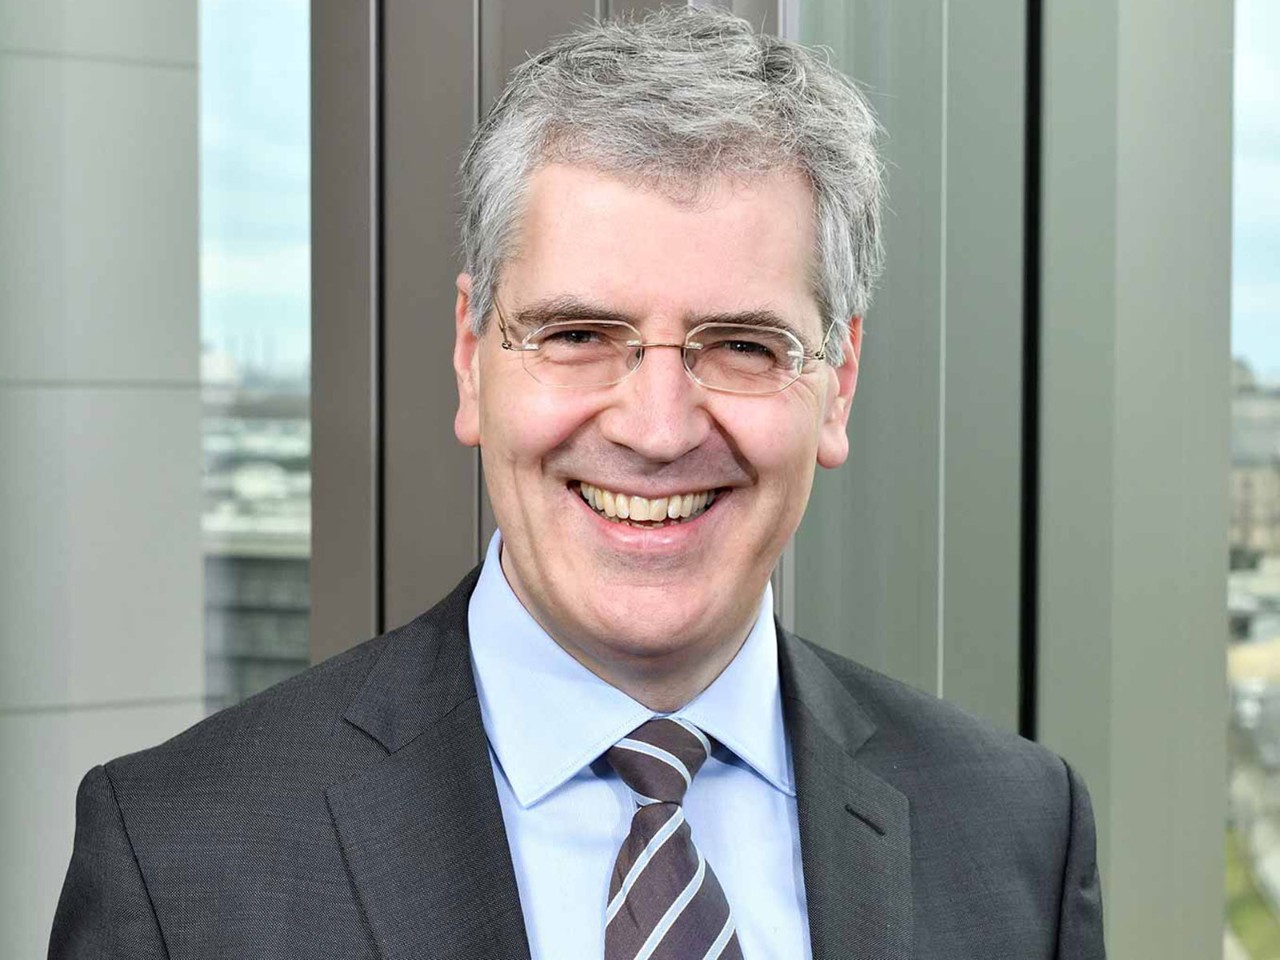 Andeas Barckow takes over as chair of the IFRS Foundation in July